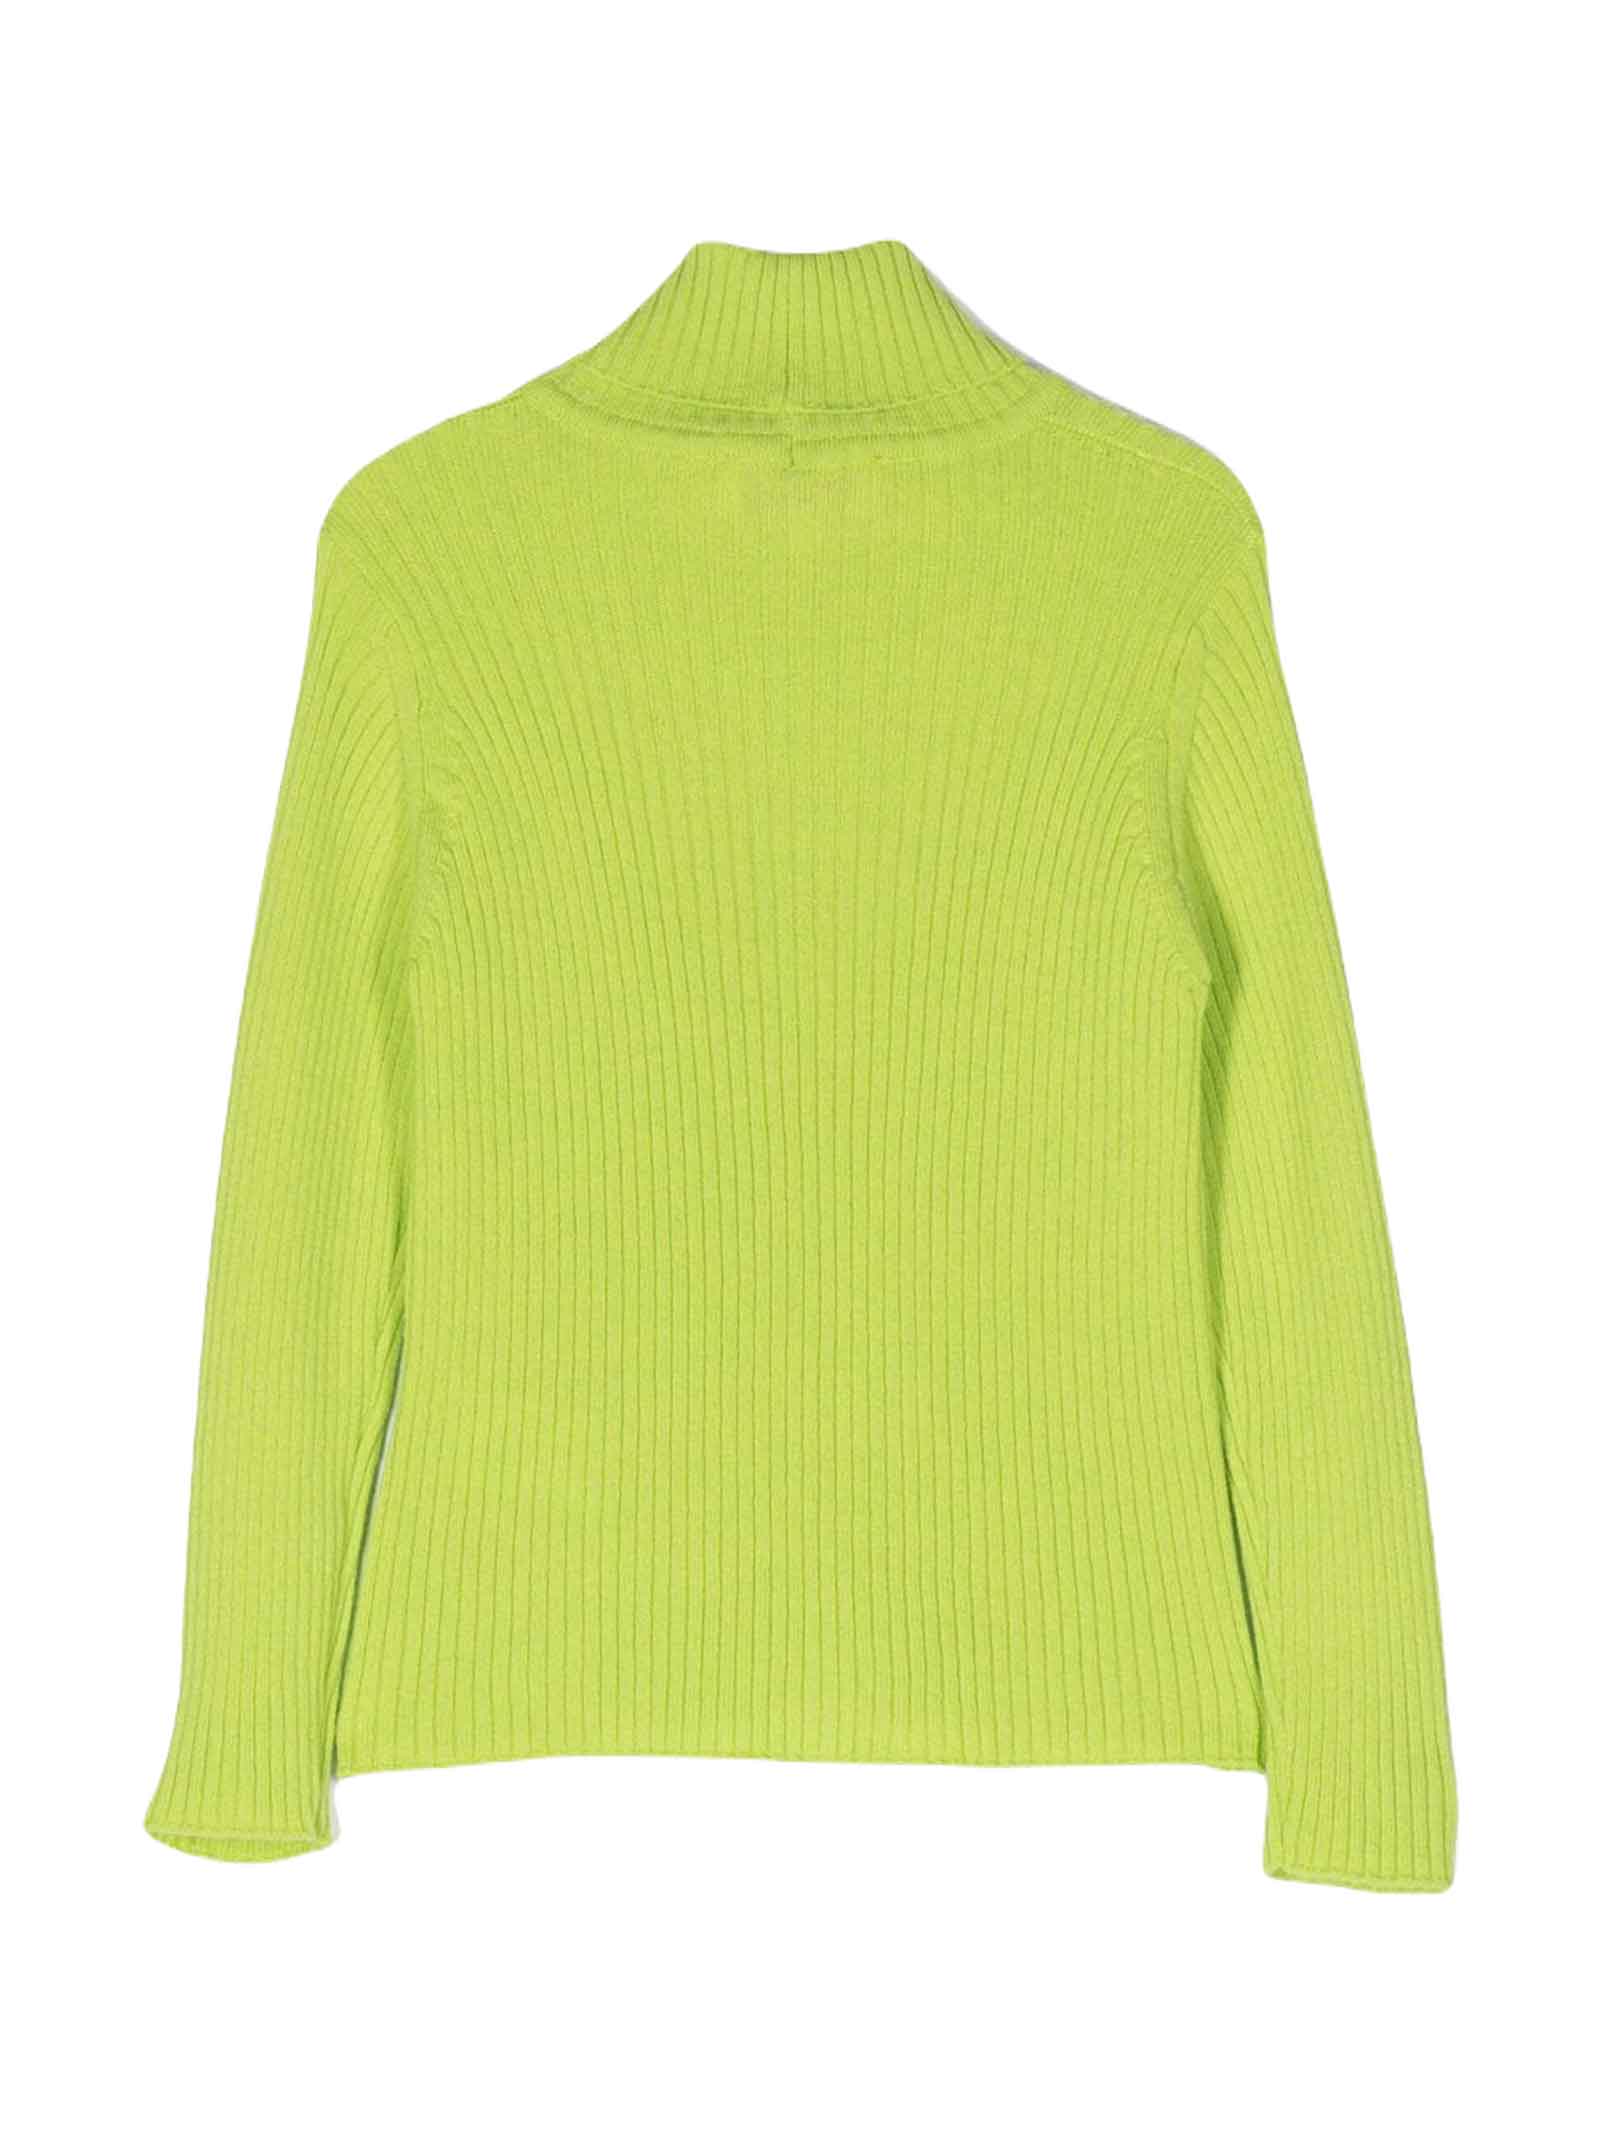 Shop Pucci Lime Sweater Girl